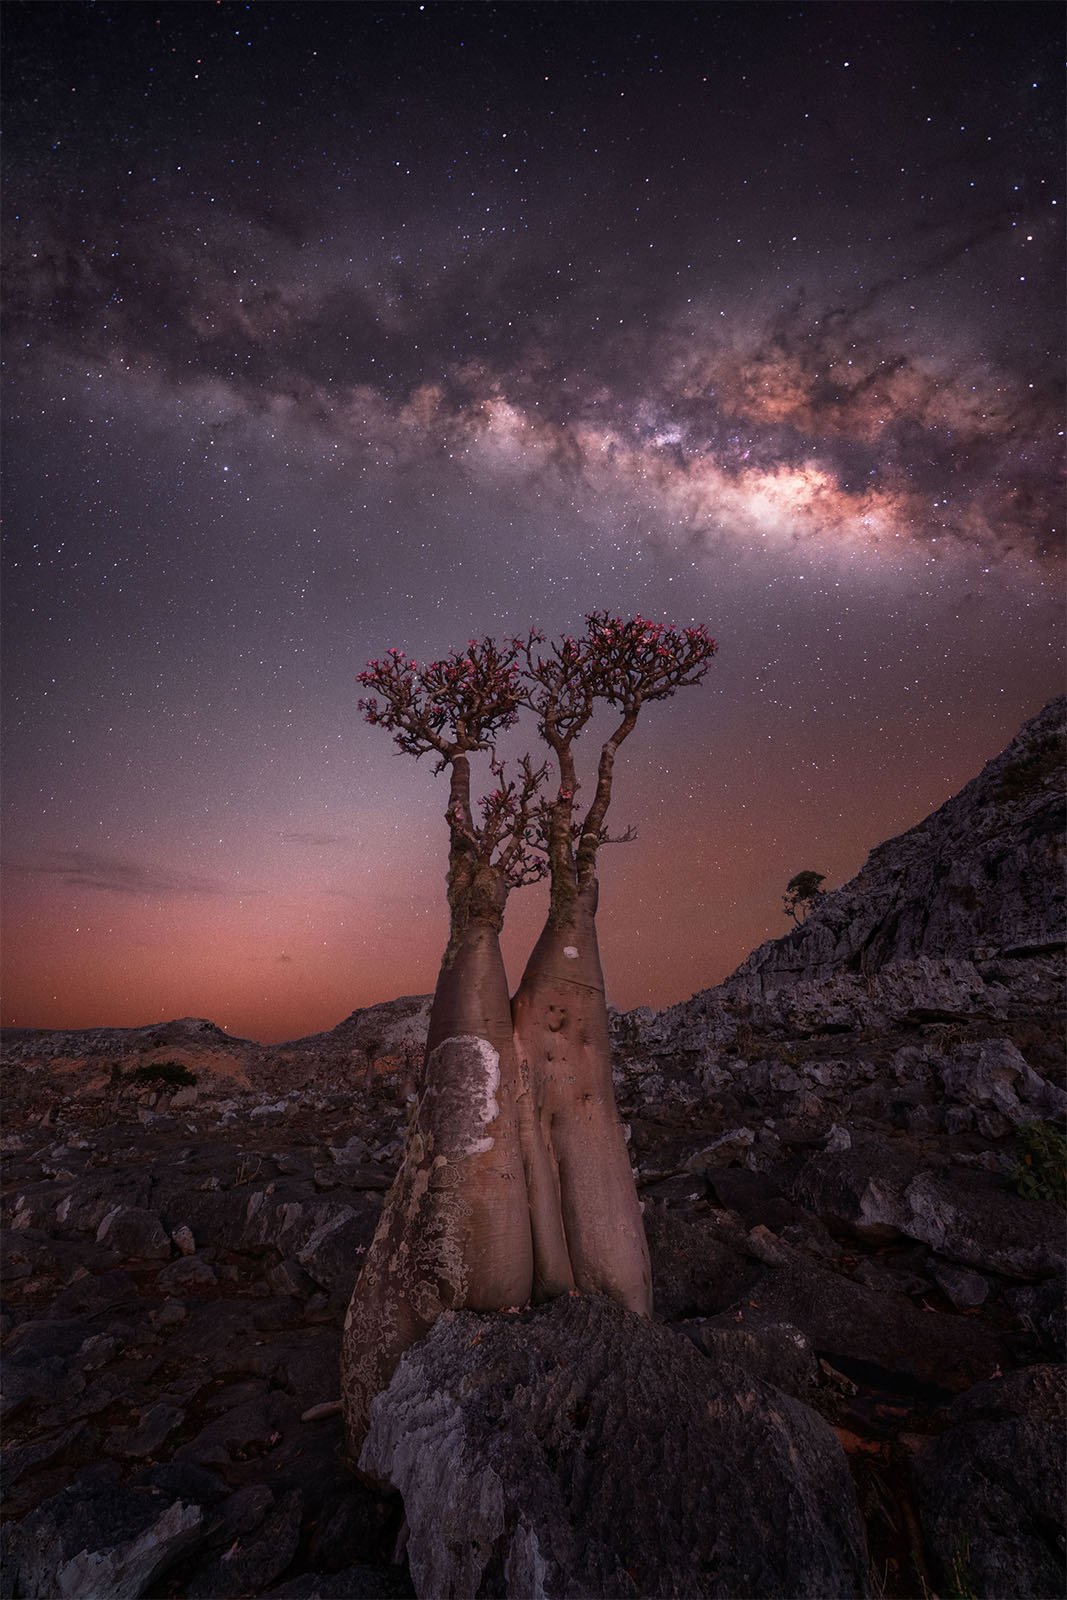 Two tall, bulbous-trunked trees with sparse foliage stand against a rugged, rocky landscape under a night sky filled with stars and a prominent Milky Way. The horizon glows with a soft, warm light, contrasting with the dark, star-studded sky above.